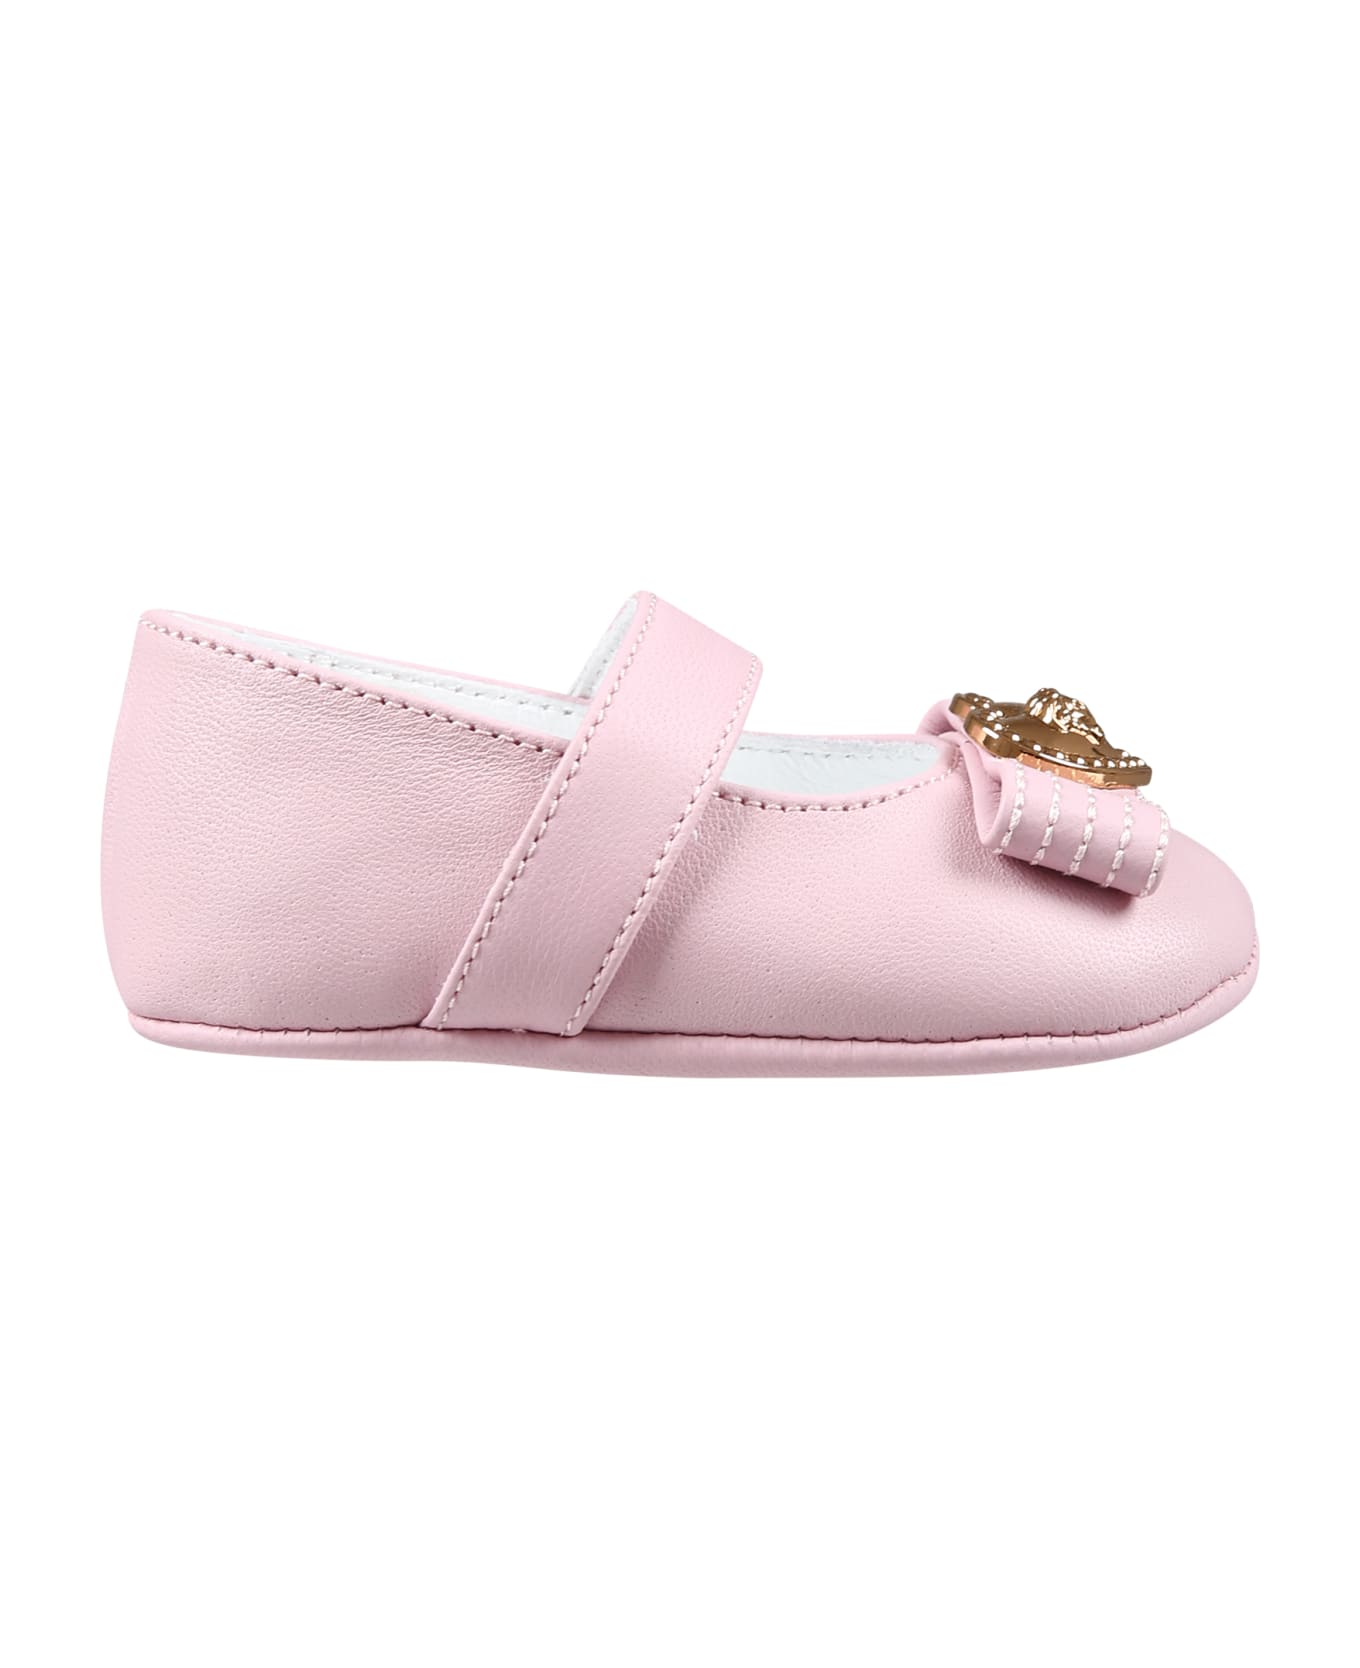 Versace Pink Ballet Flats For Baby Girl With Heart And Medusa - Pink シューズ